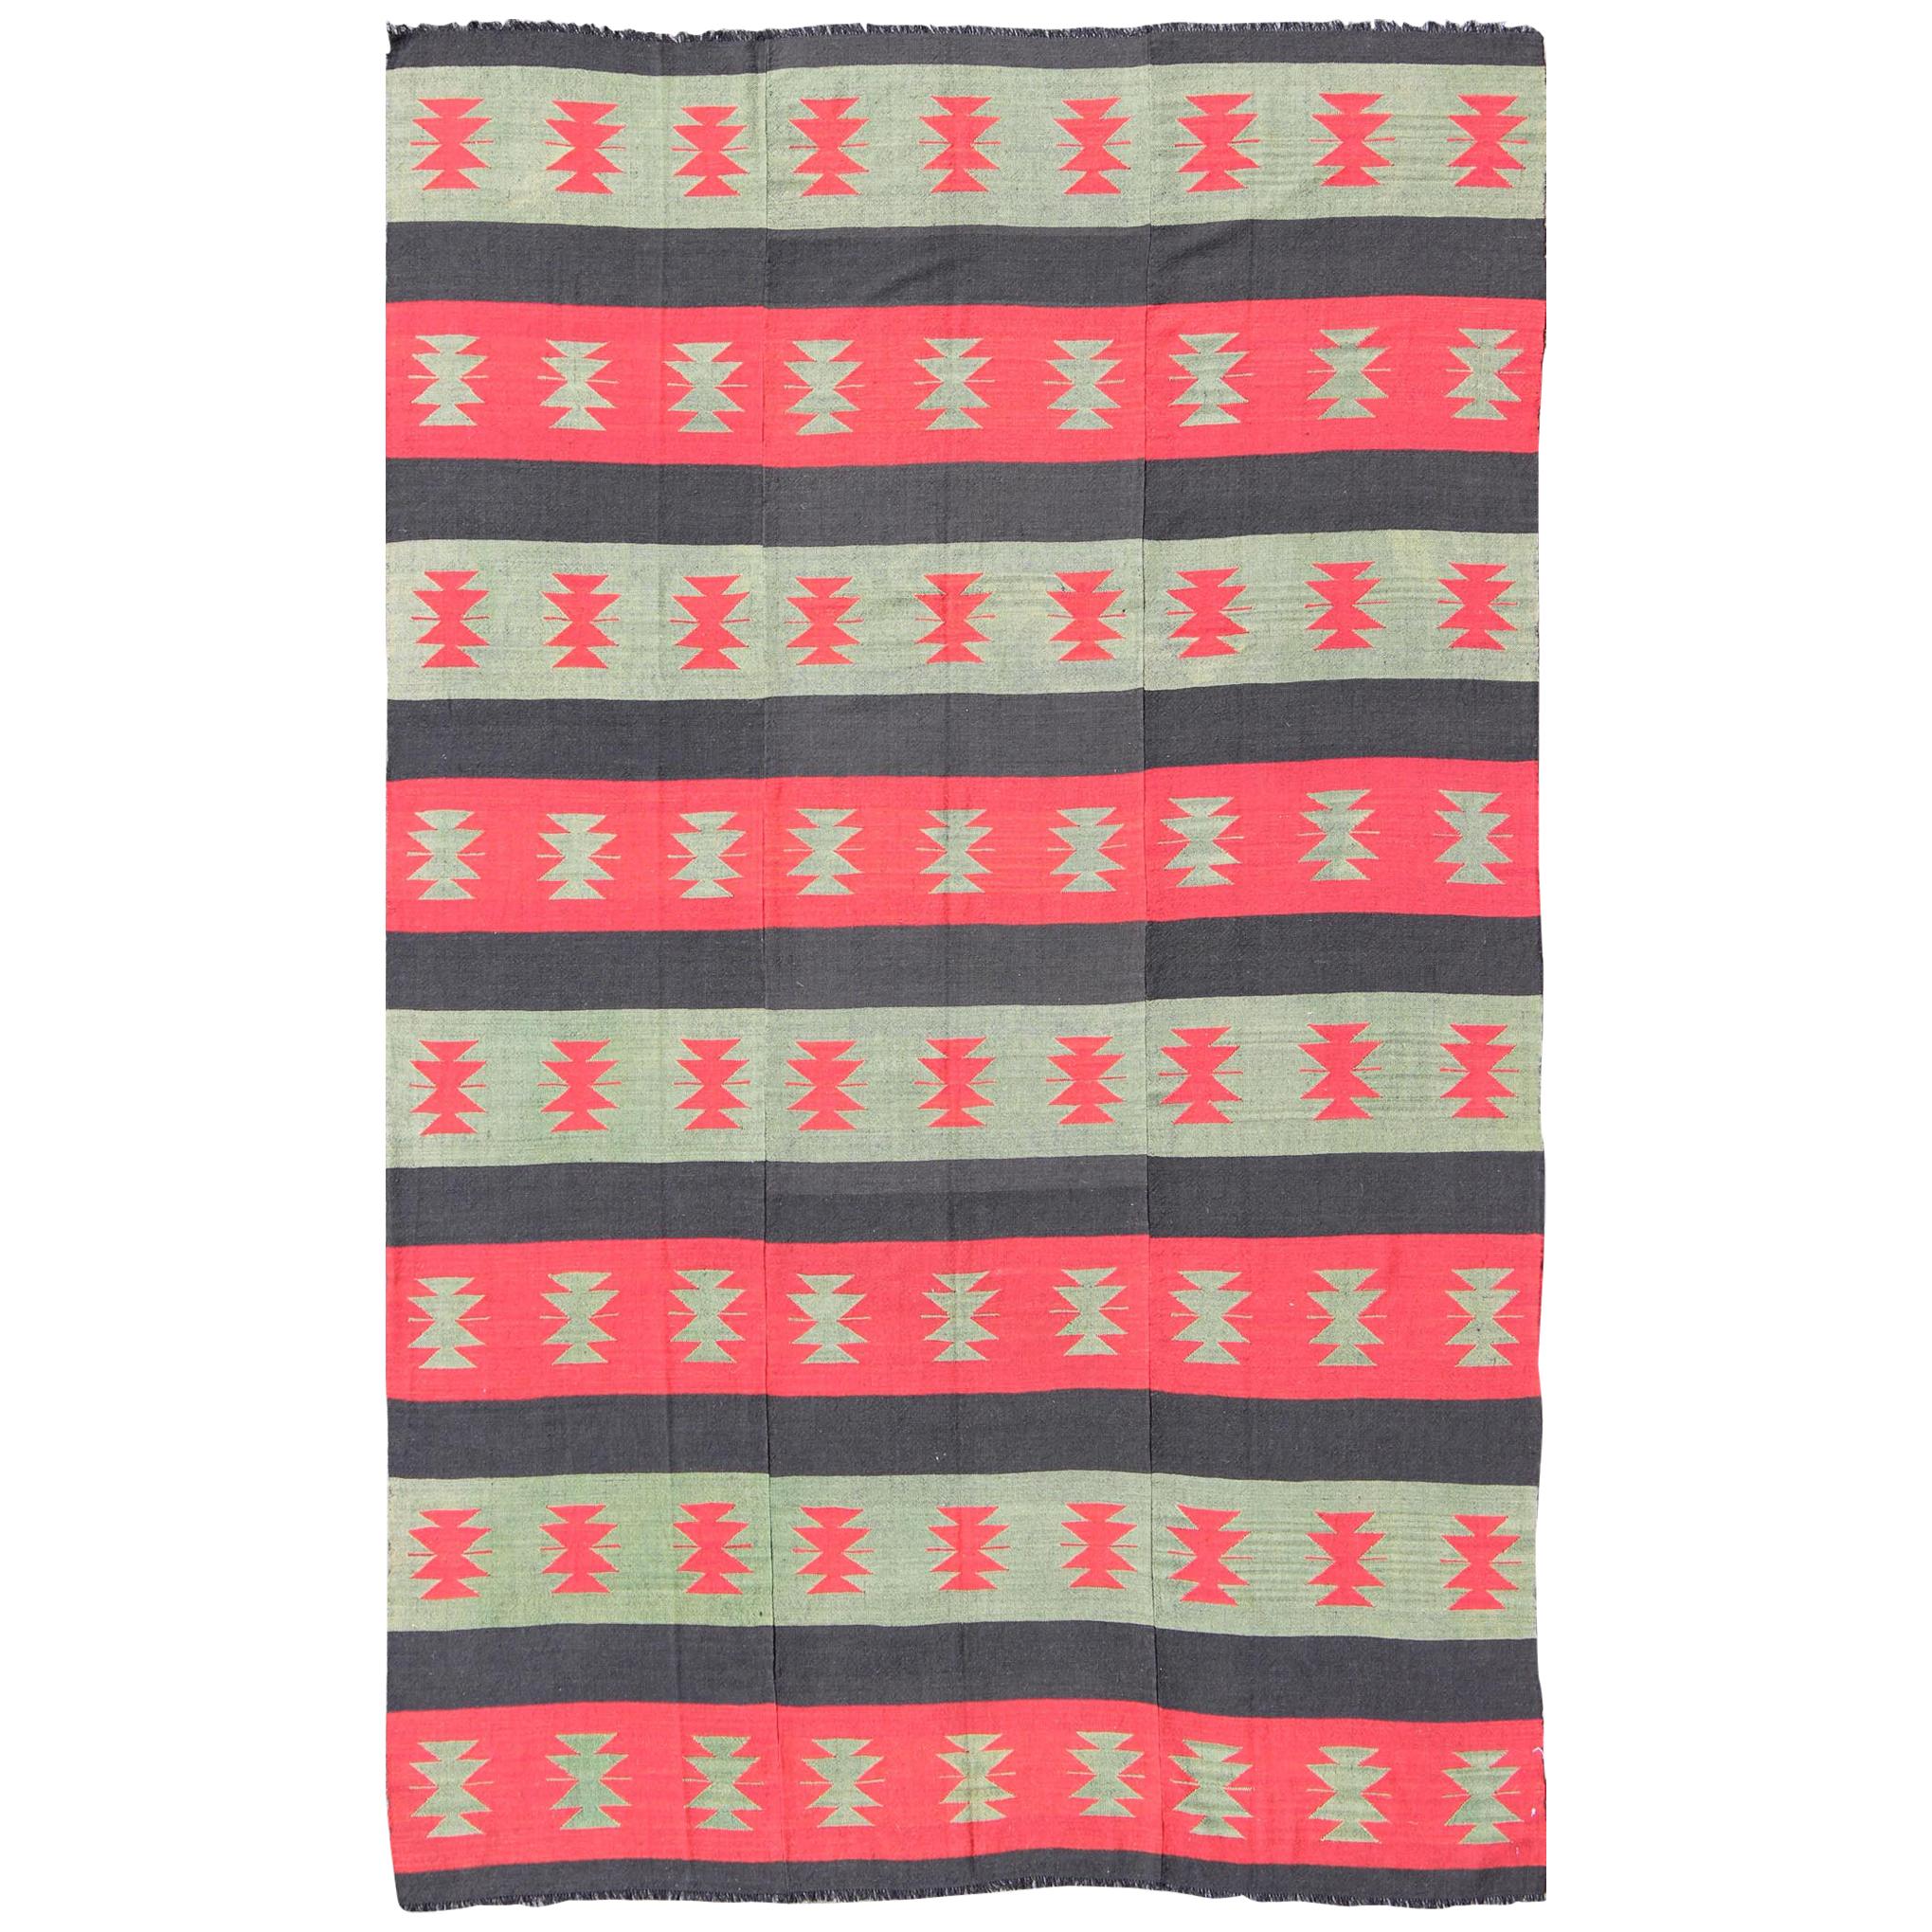 Large Vintage Kilim Rug with Tribal Shapes and Stripes in Red, Brown and Green For Sale